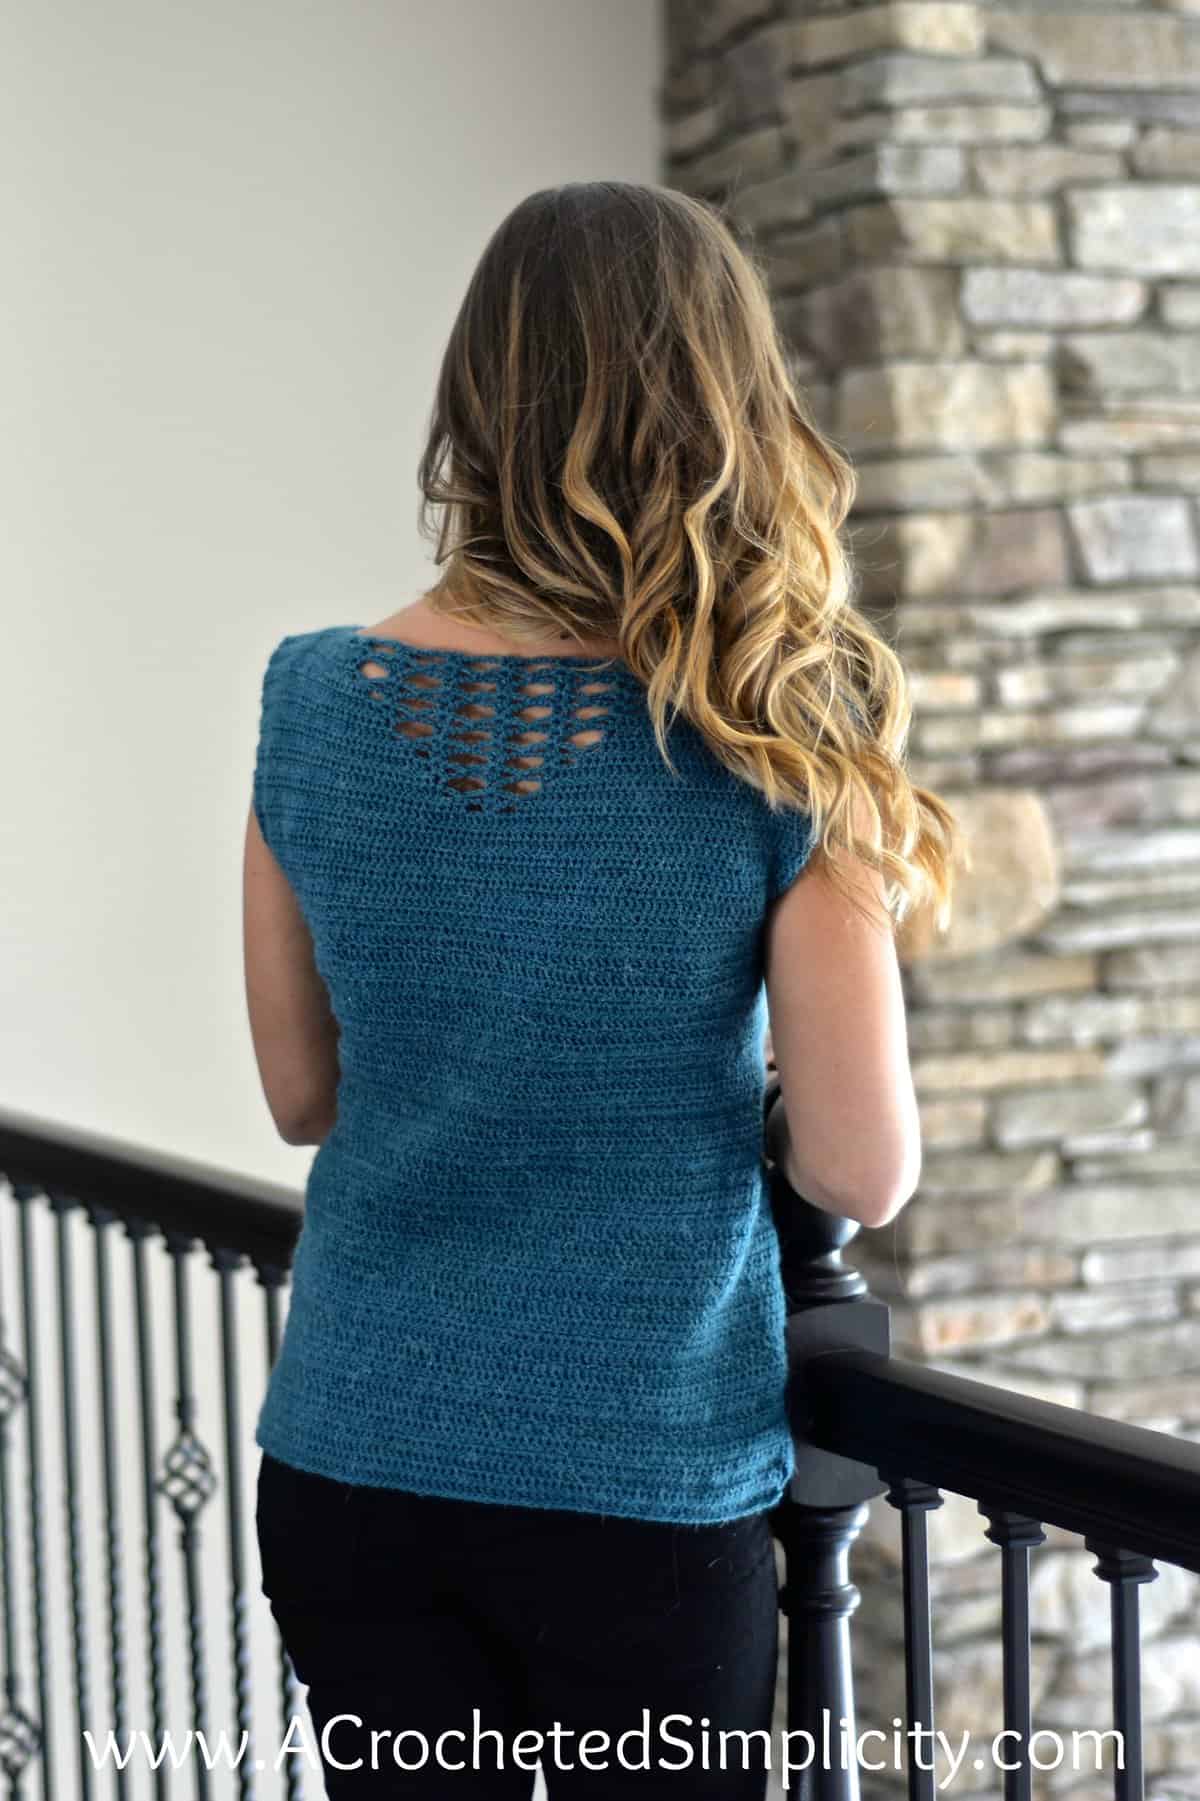 Woman modeling back side of crochet summer top and leaning into black railing.